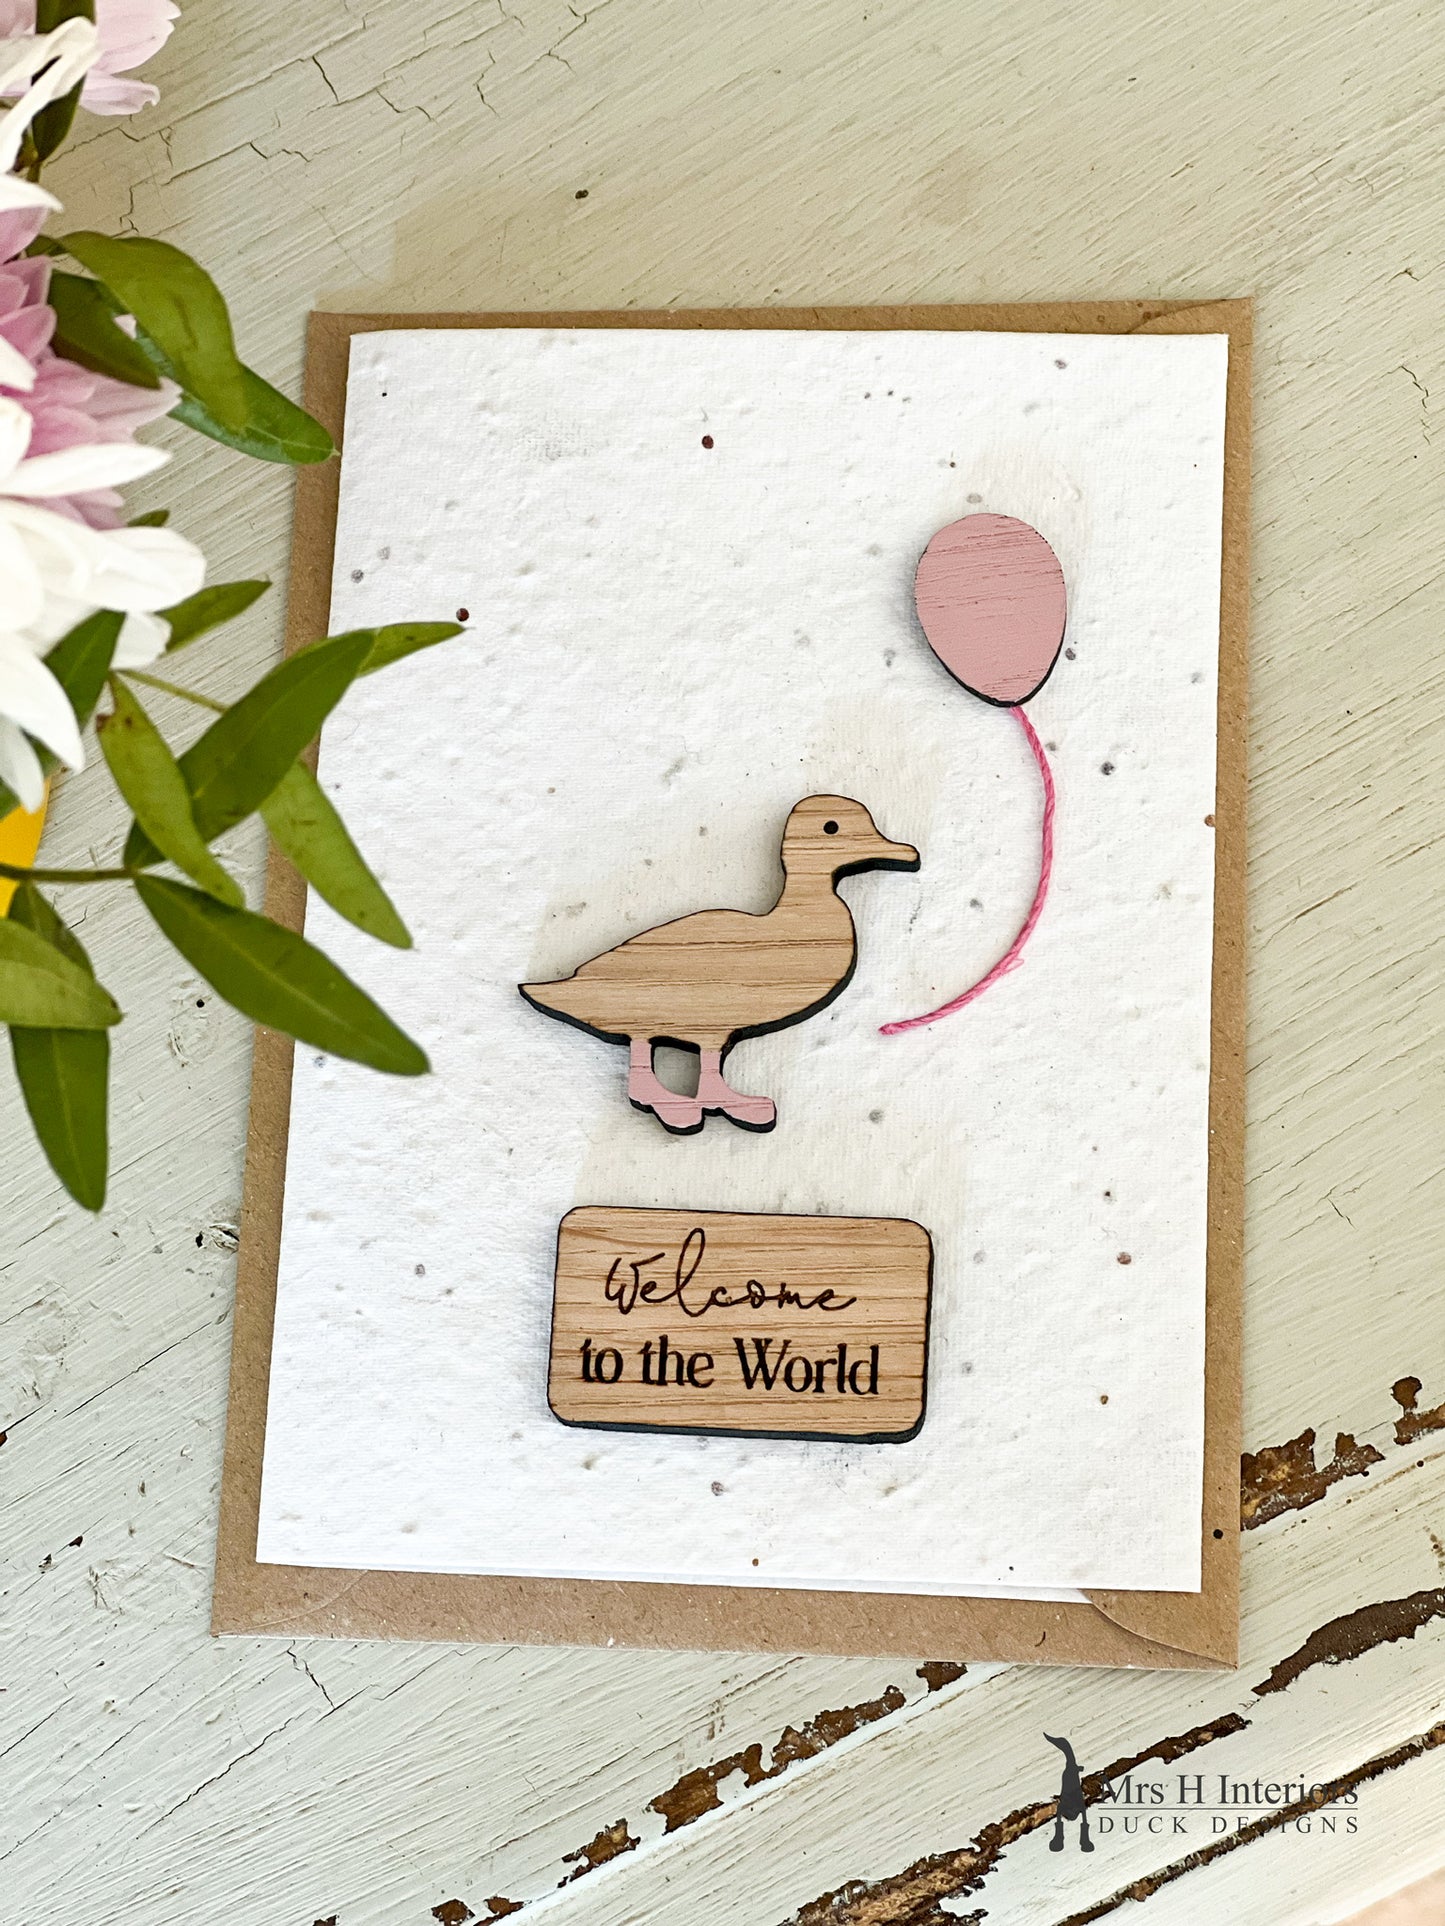 Welcome To The World - Duckling & Balloon - Congratulations New Baby Card - Decorated Wooden Duck in Boots by Mrs H the Duck Lady